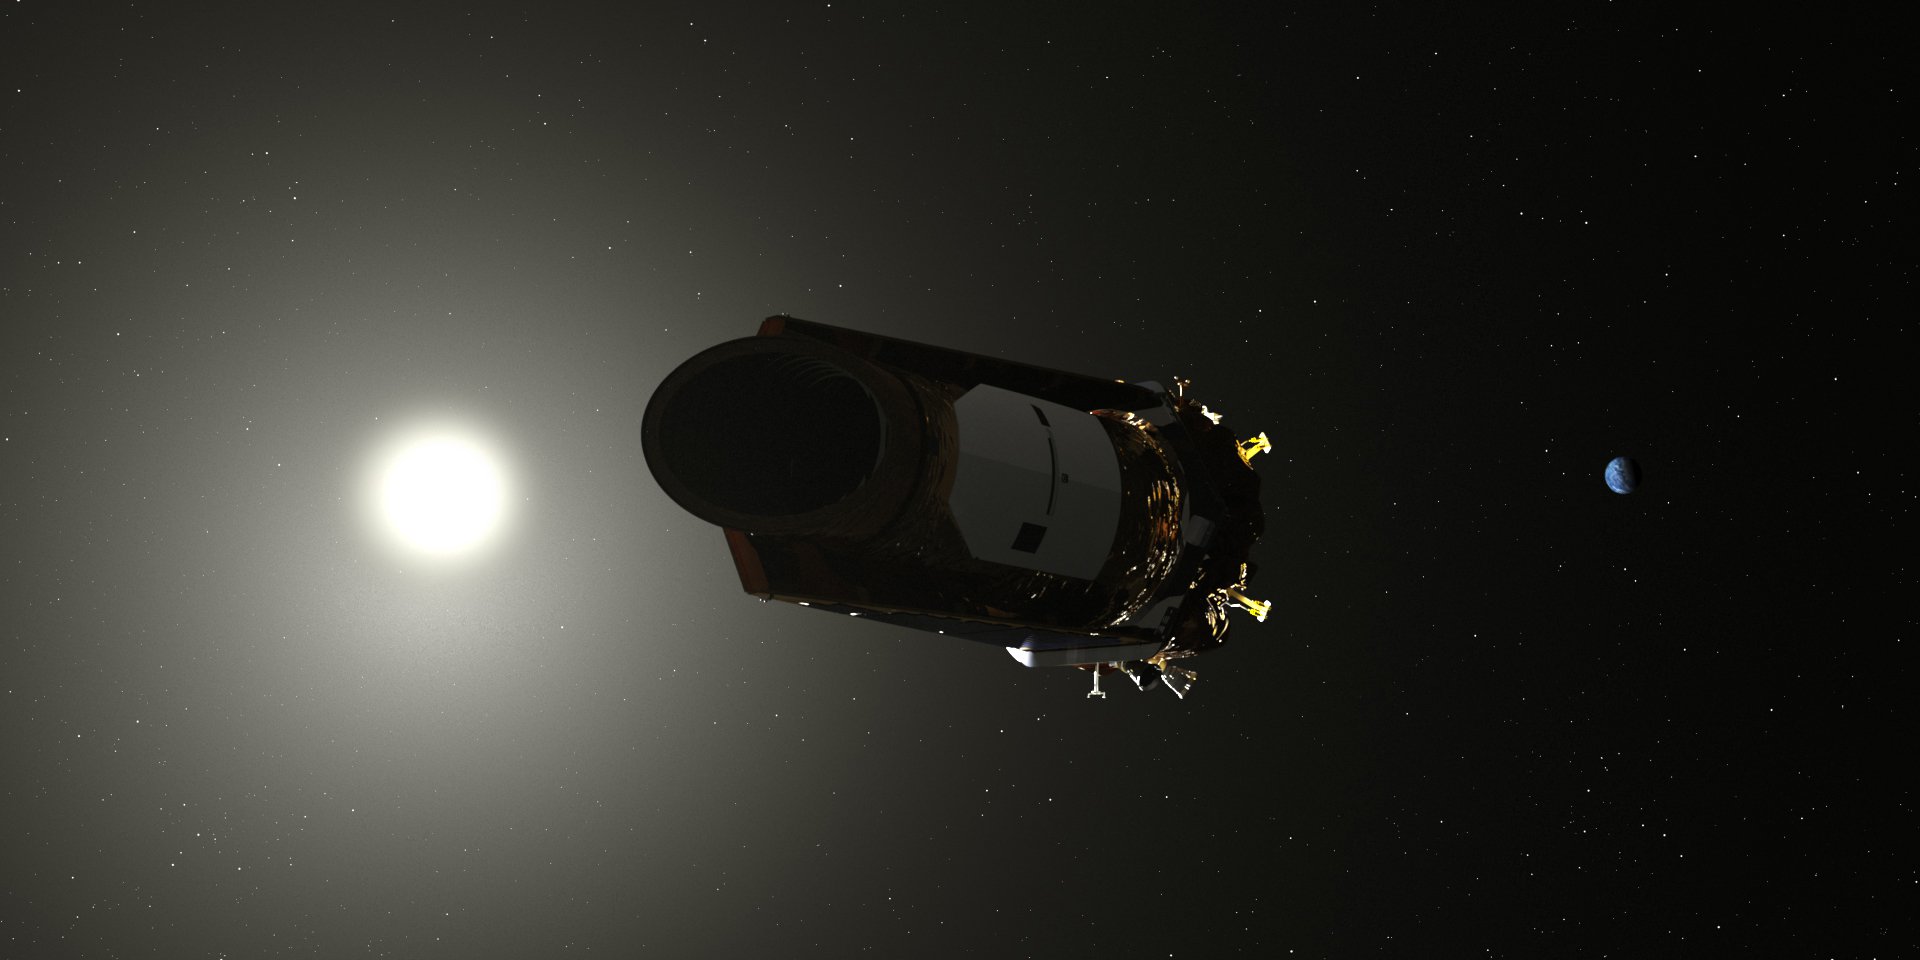 Last moments: the space telescope 